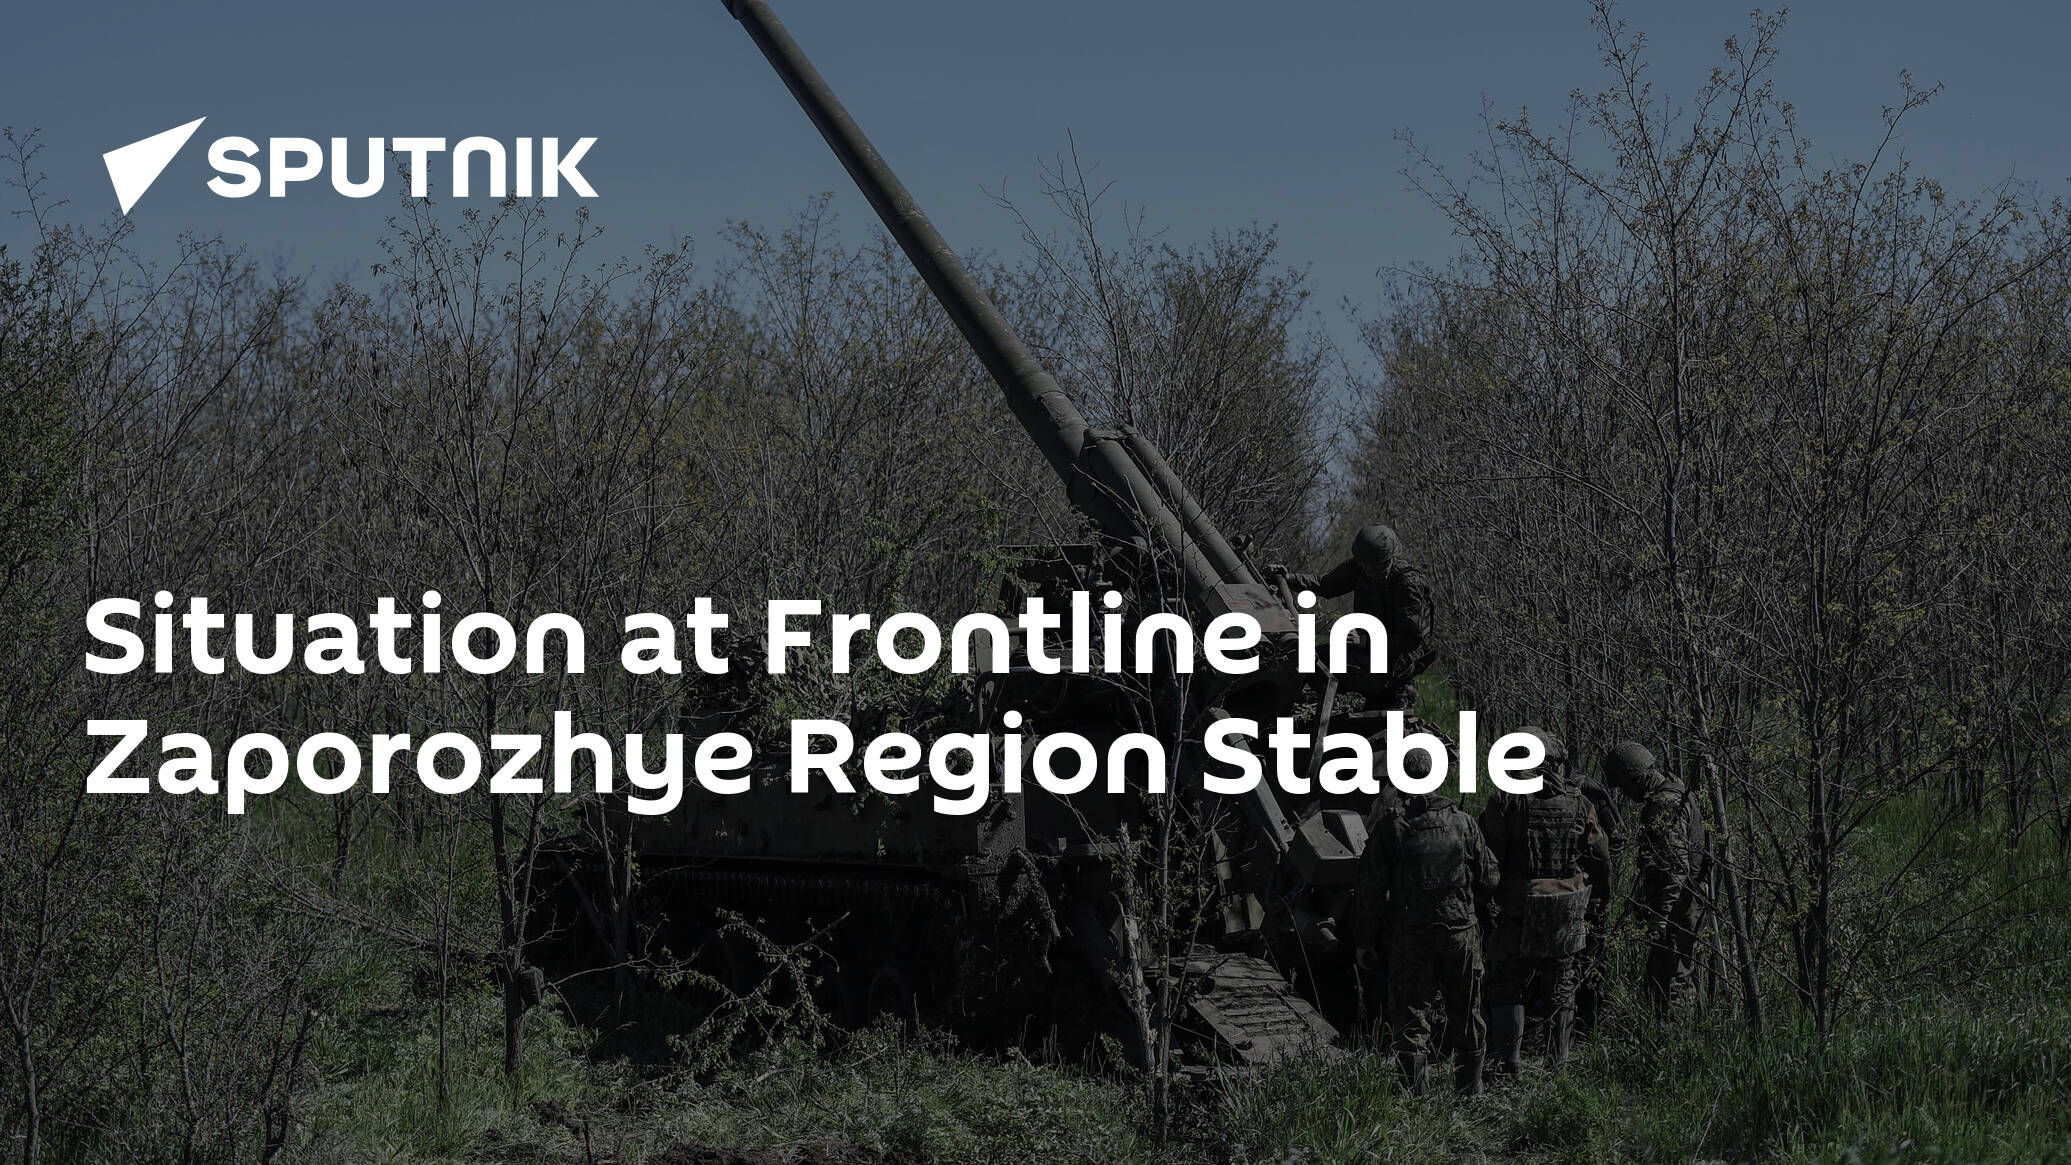 Situation at Frontline in Zaporozhye Region Stable